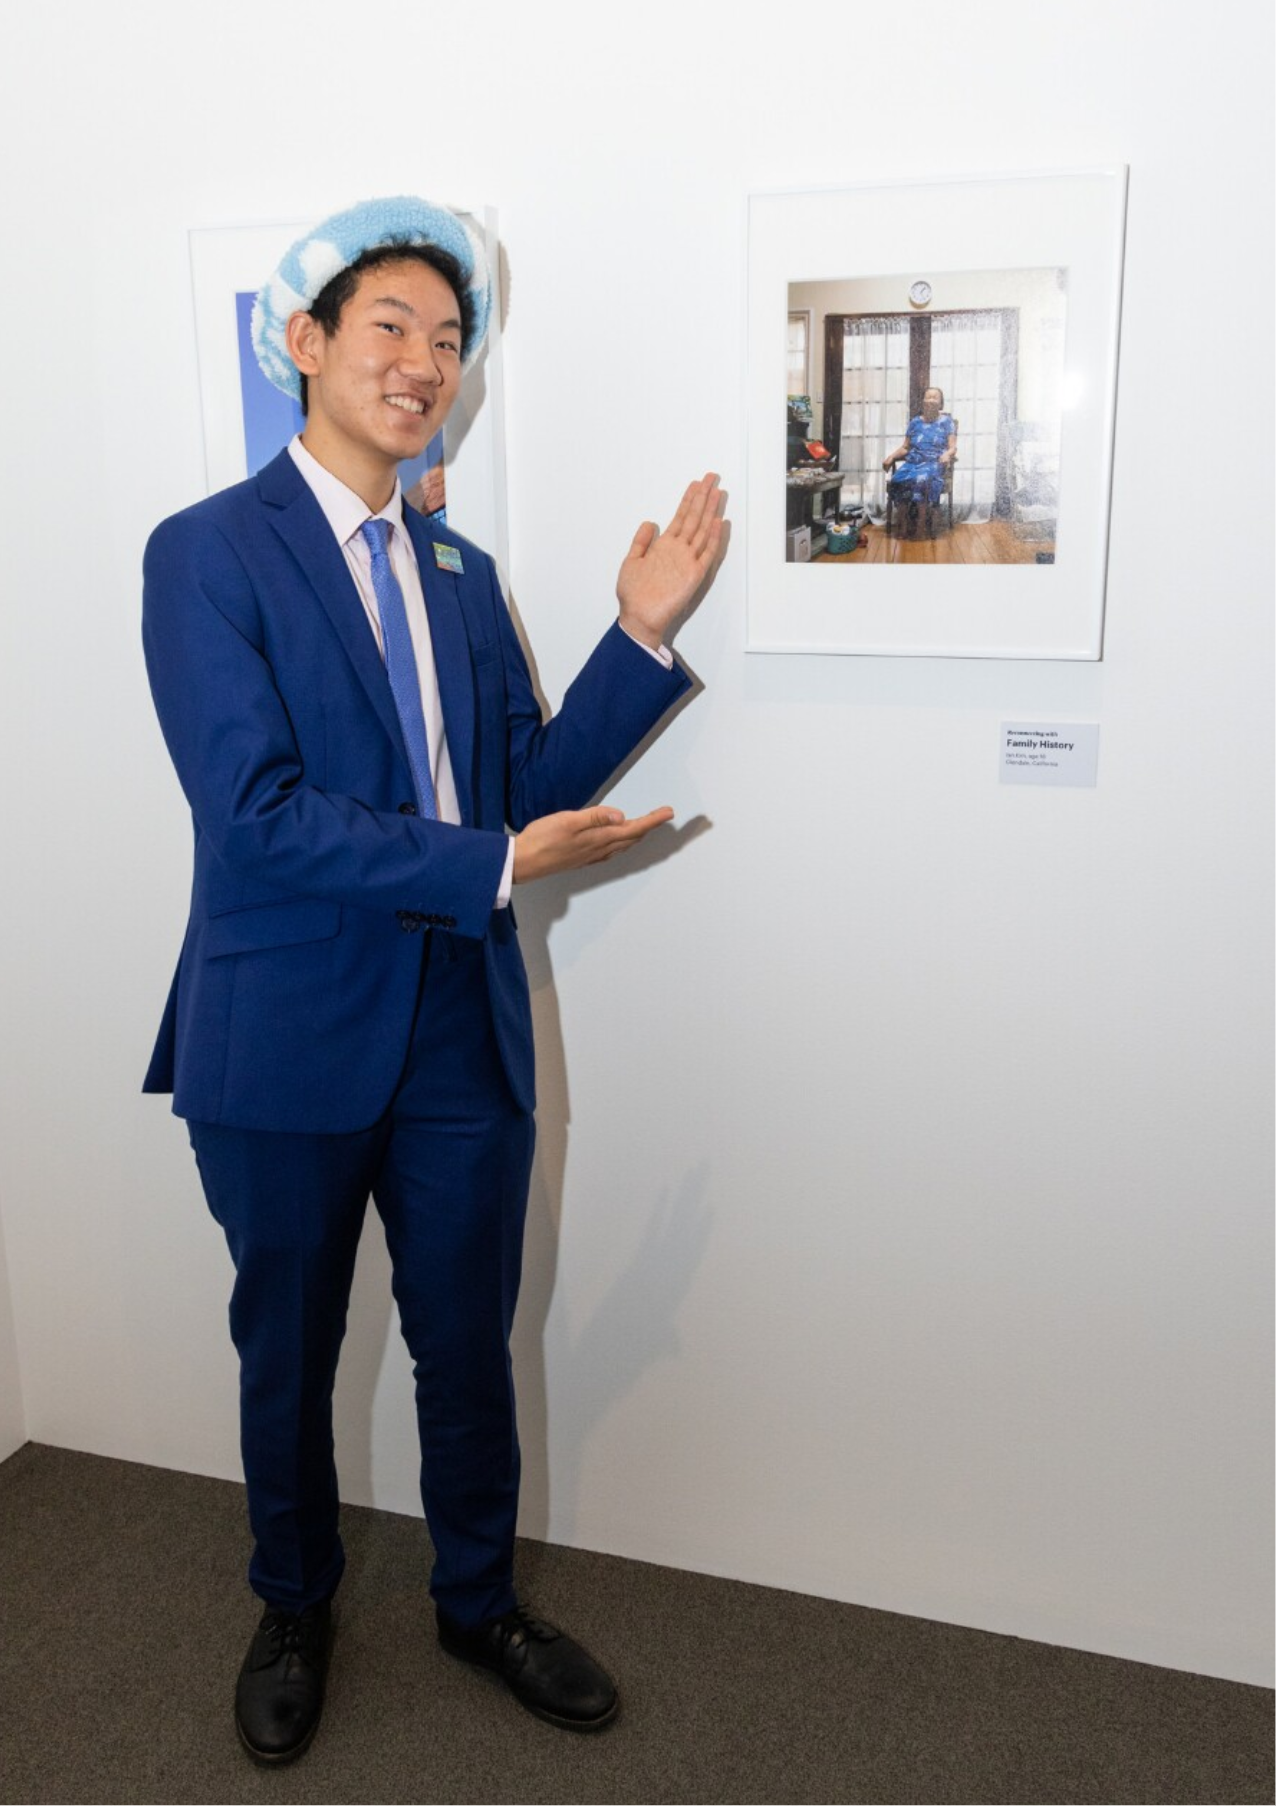 J. Paul Getty Museum X Amplifier Young Artists Share the Stories Behind Their Winning Photographs - Ian Kim, 17, one of 20 winners exhibited in the J. Paul Getty museum in Los Angeles